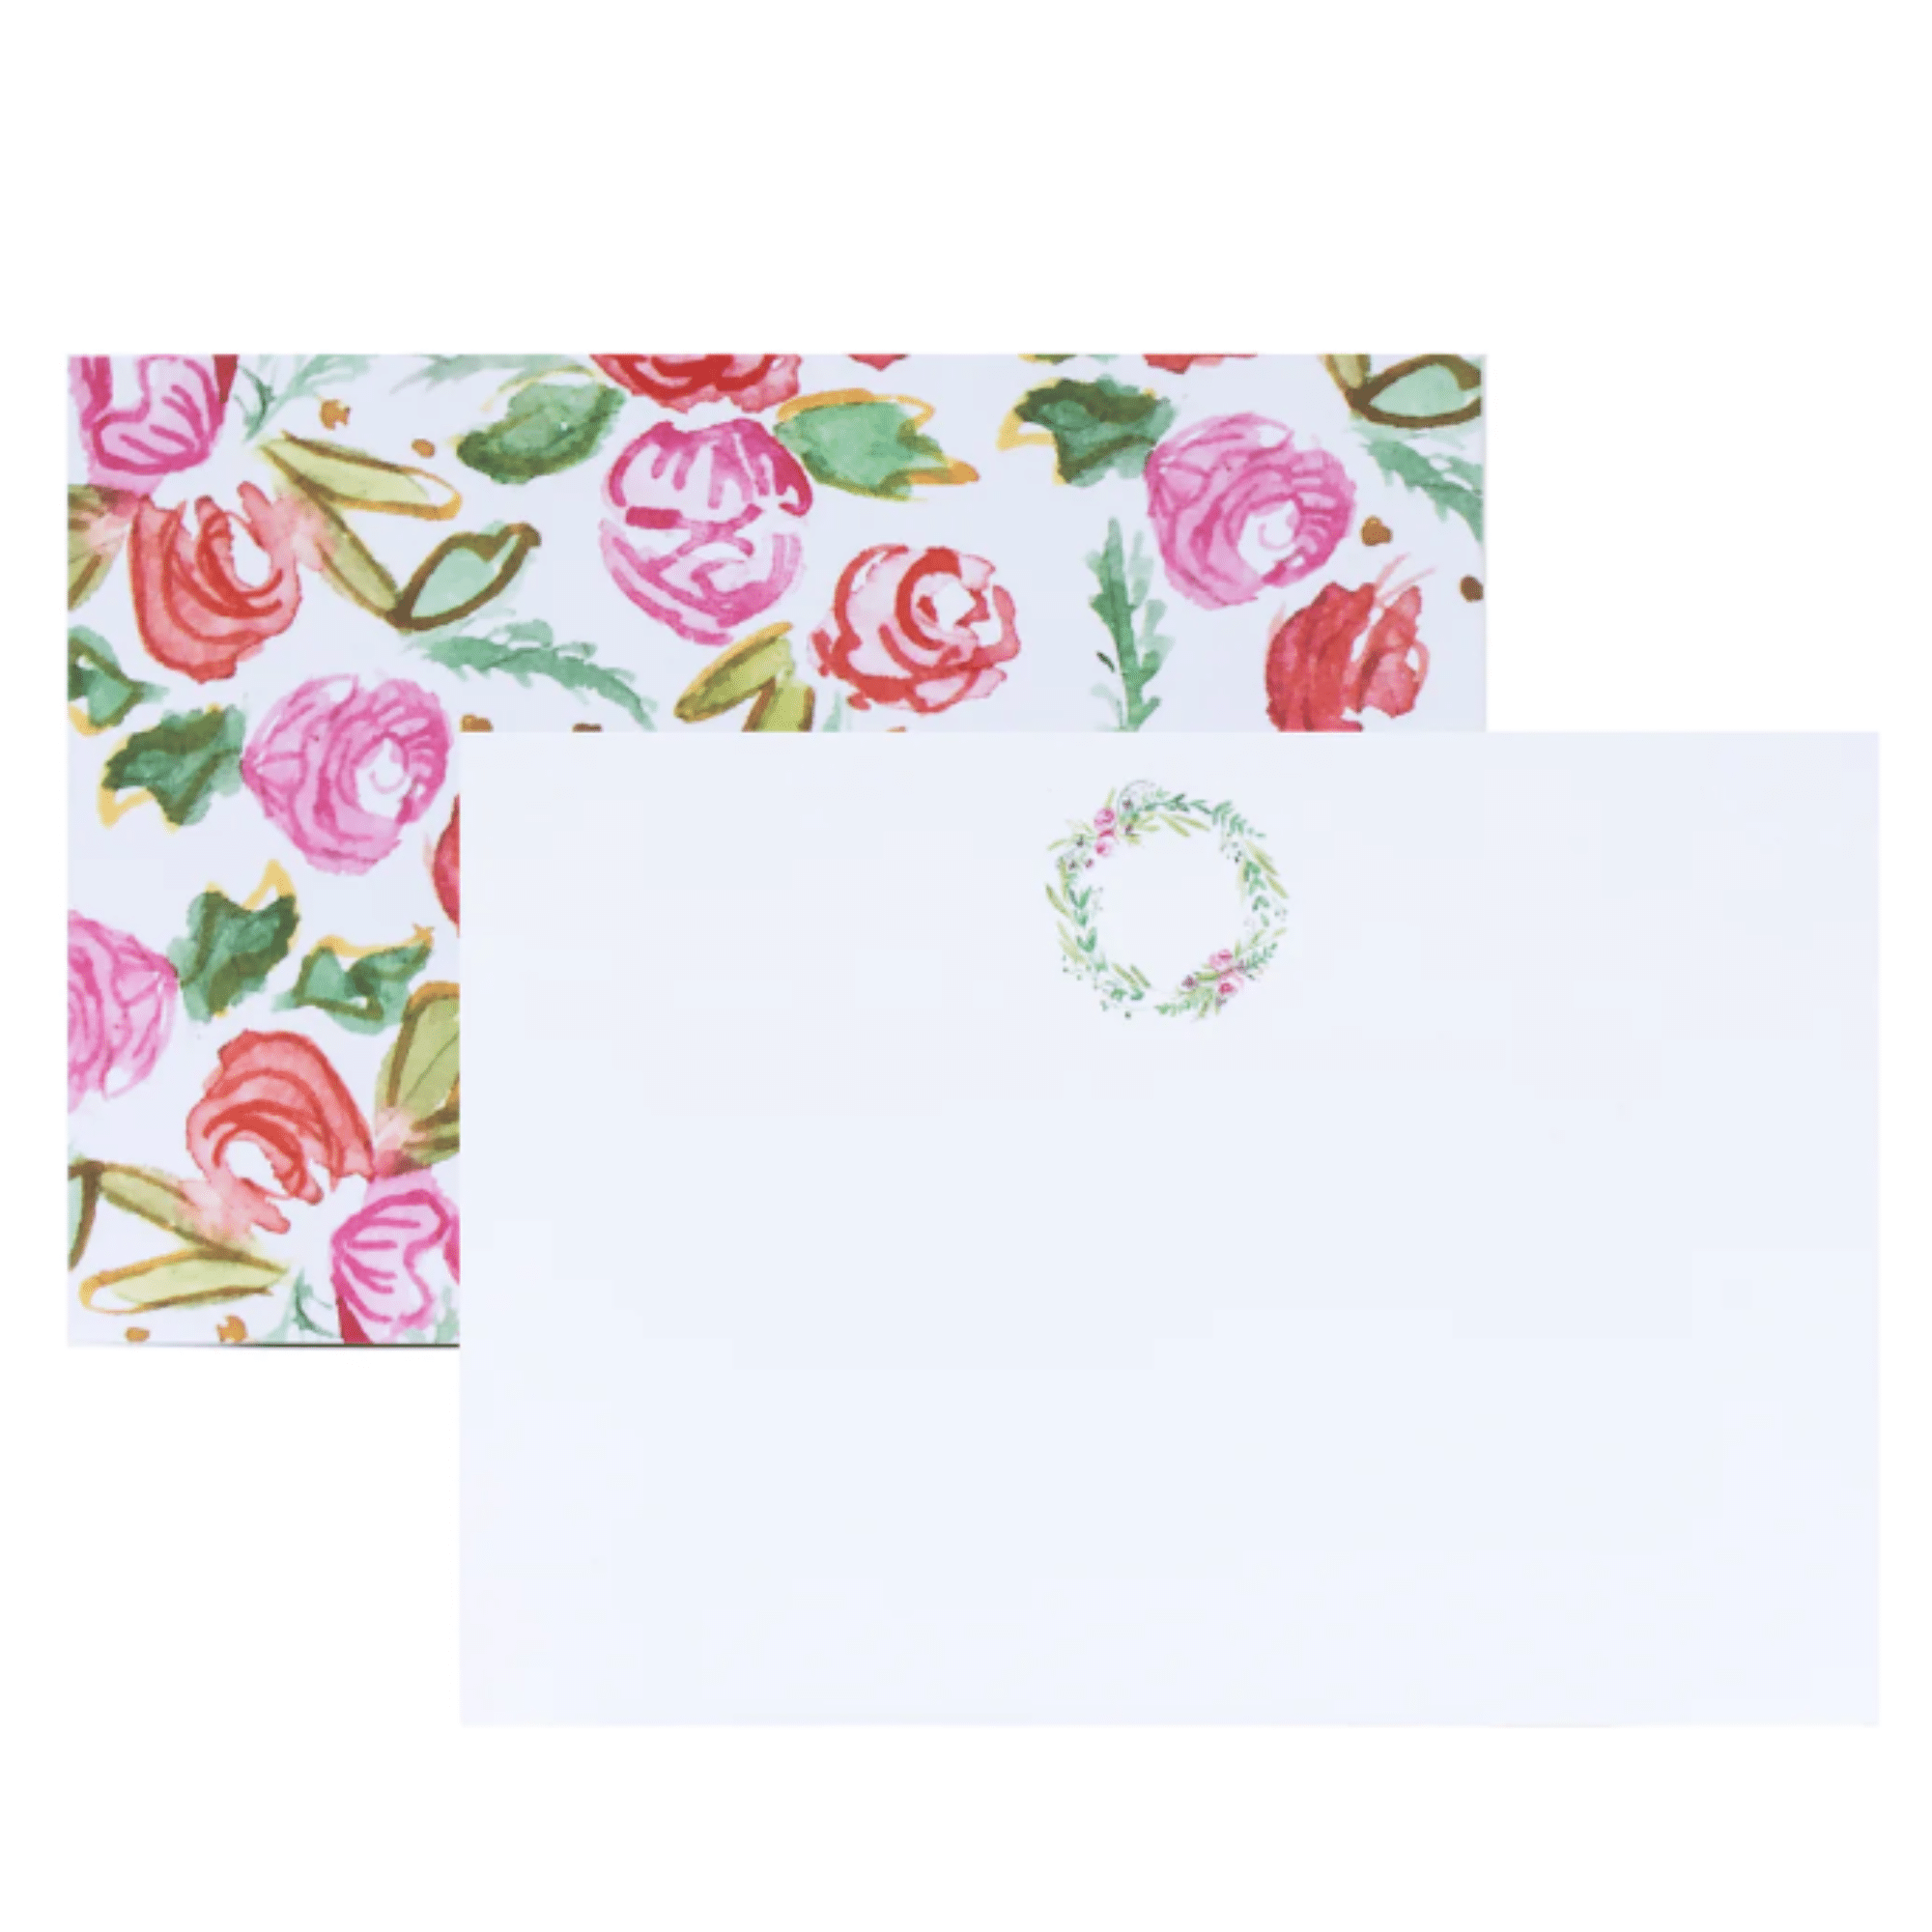 3.5 x 5 Pink Floral Wreath Notecards (set of 8)-1